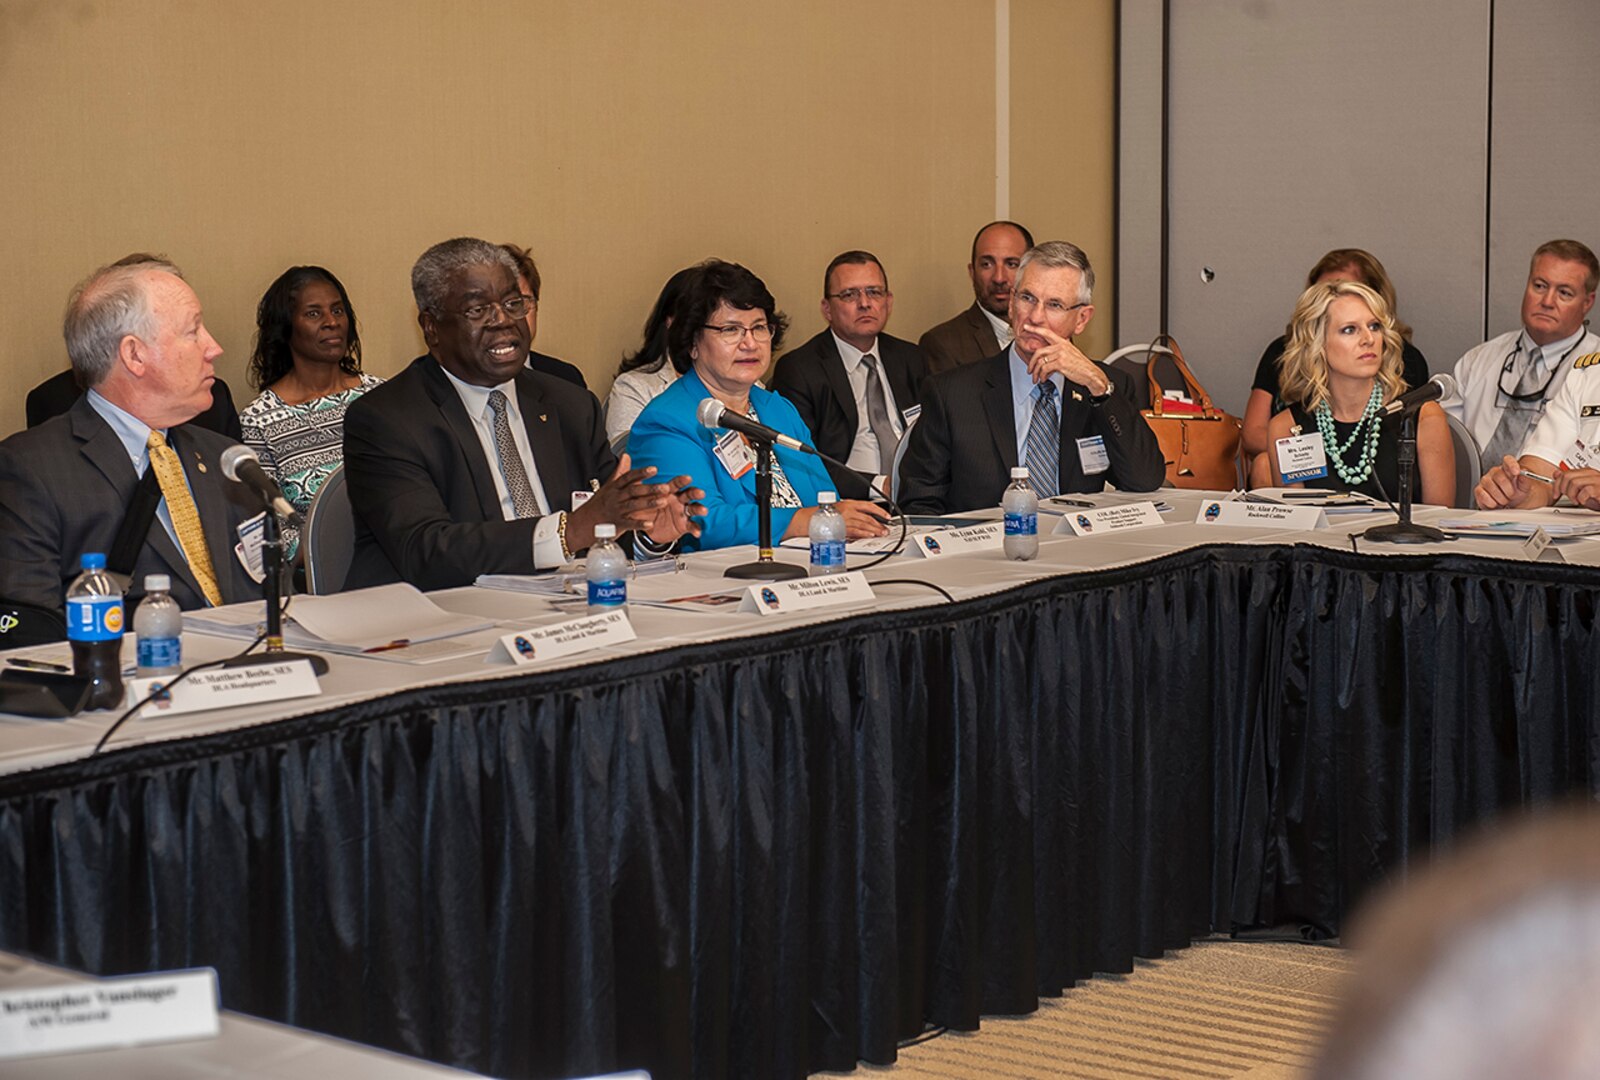 Milton Lewis (2nd from left) discusses topics at the 2016 Captain of Industry meeting, held as part of the 2016 Land and Maritime Supplier Conference and Expo Aug. 30-Sept. 1 at the Columbus Convention Center. 